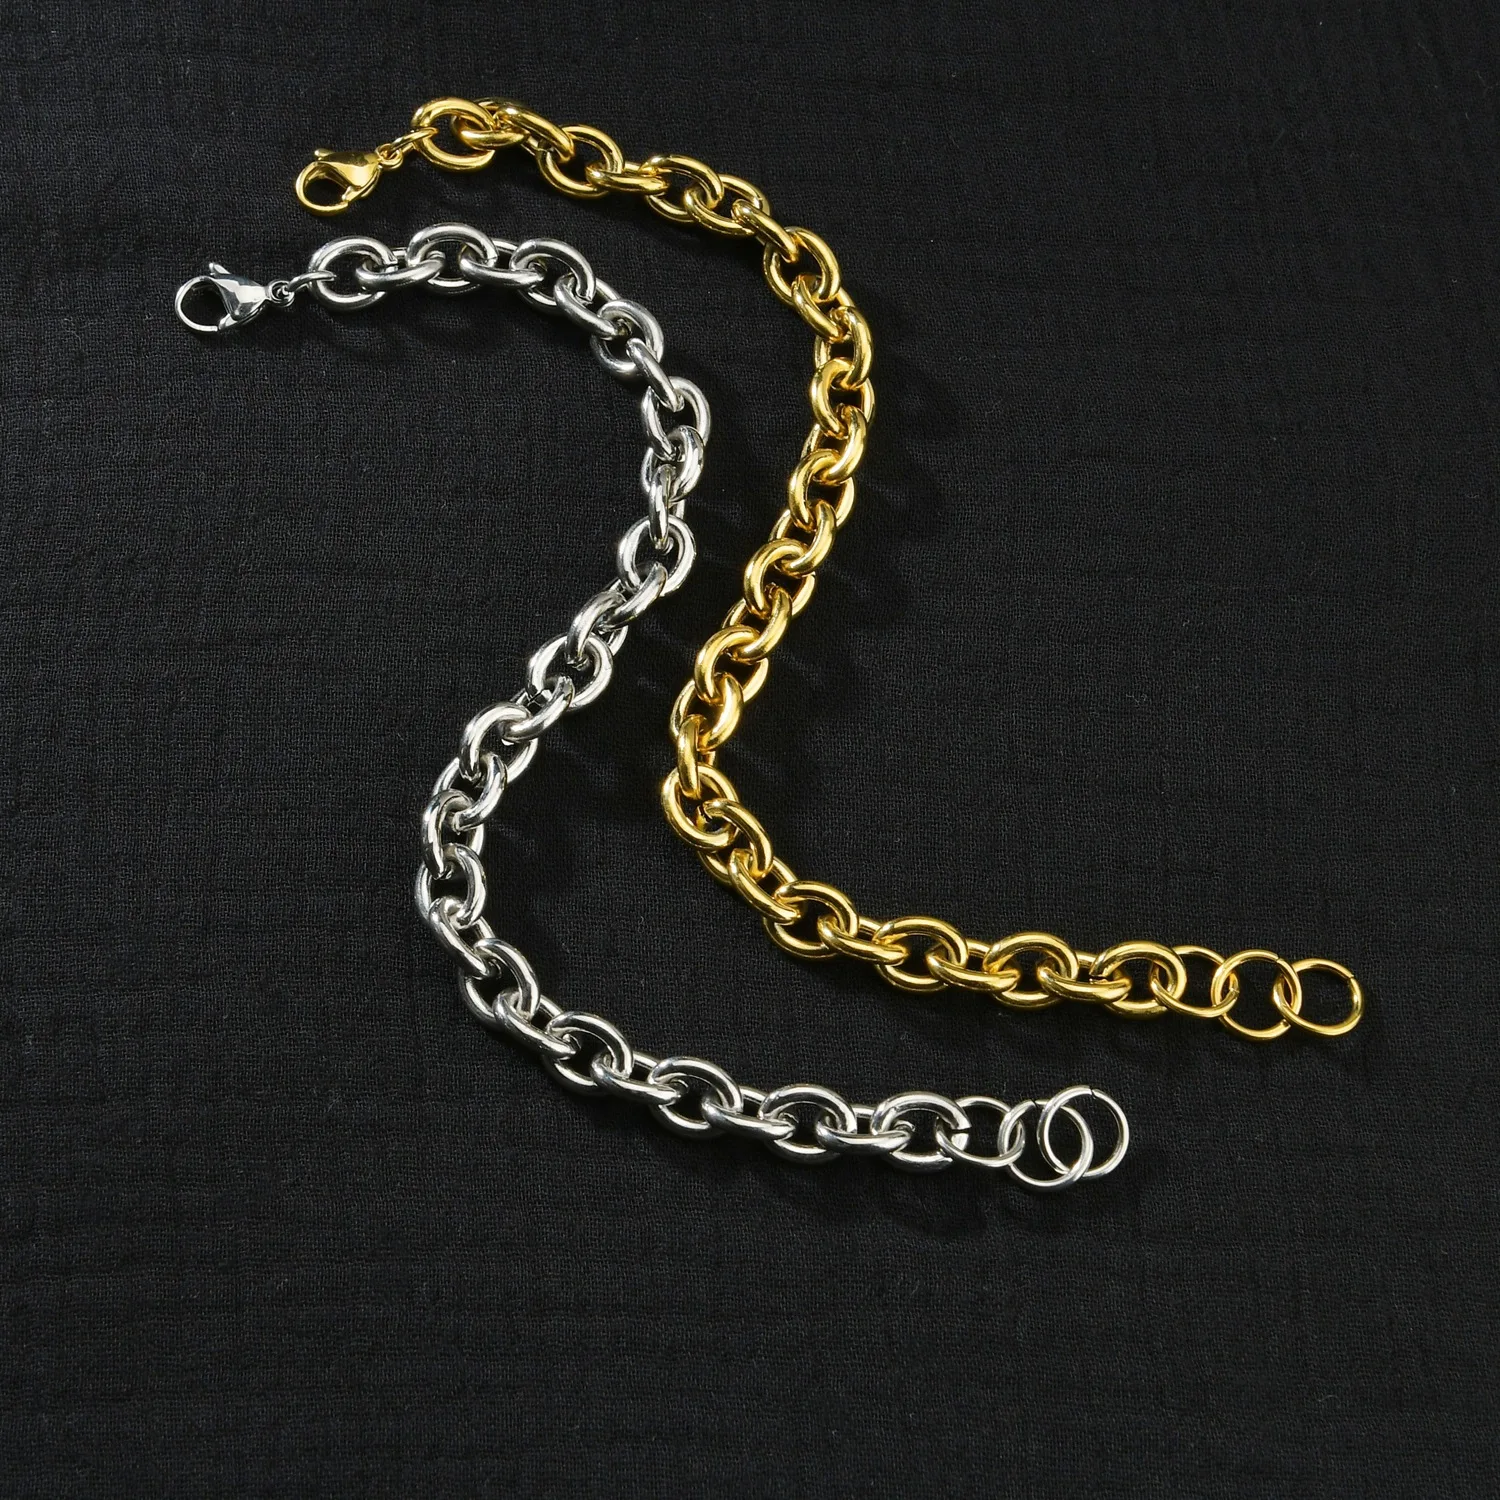 2022 New 316L Stainless Steel Real Gold Plating Base O Chain Bracelet Men Women Charms Pulseras Mujer High Quality Jewelry 5mm